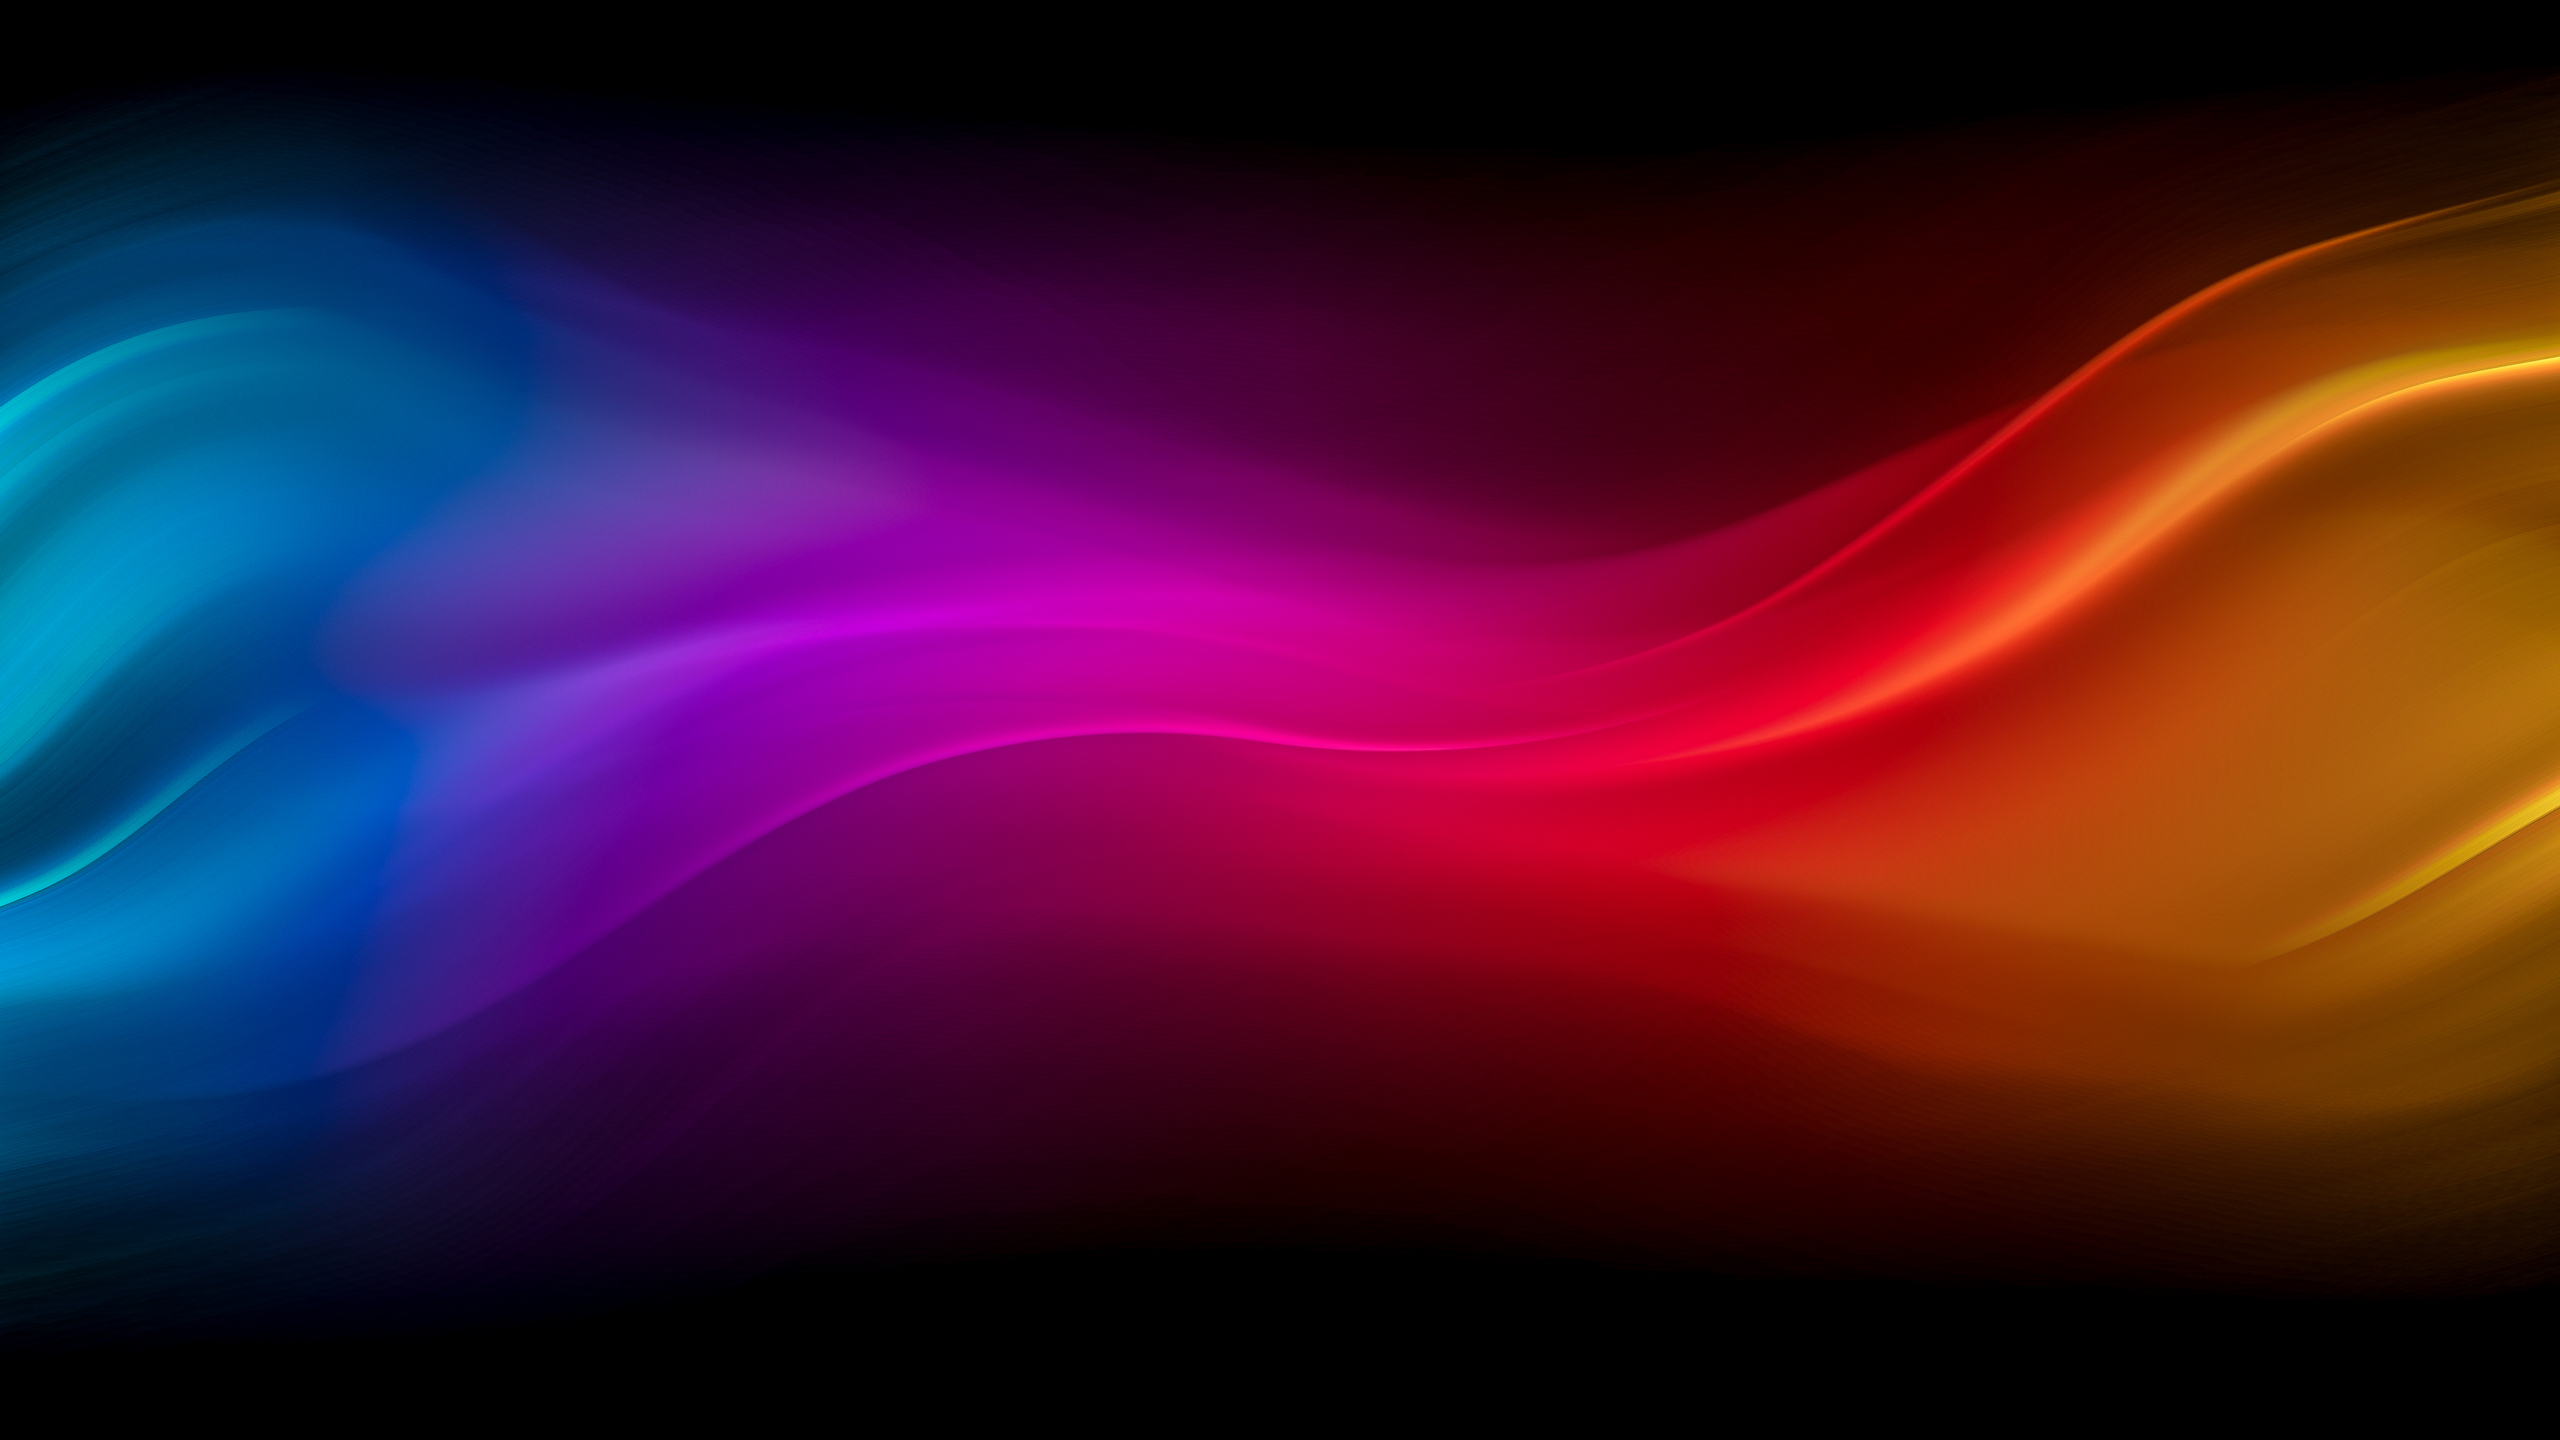 X blue purple red yellow waves k p resolution hd k wallpapers images backgrounds photos and pictures